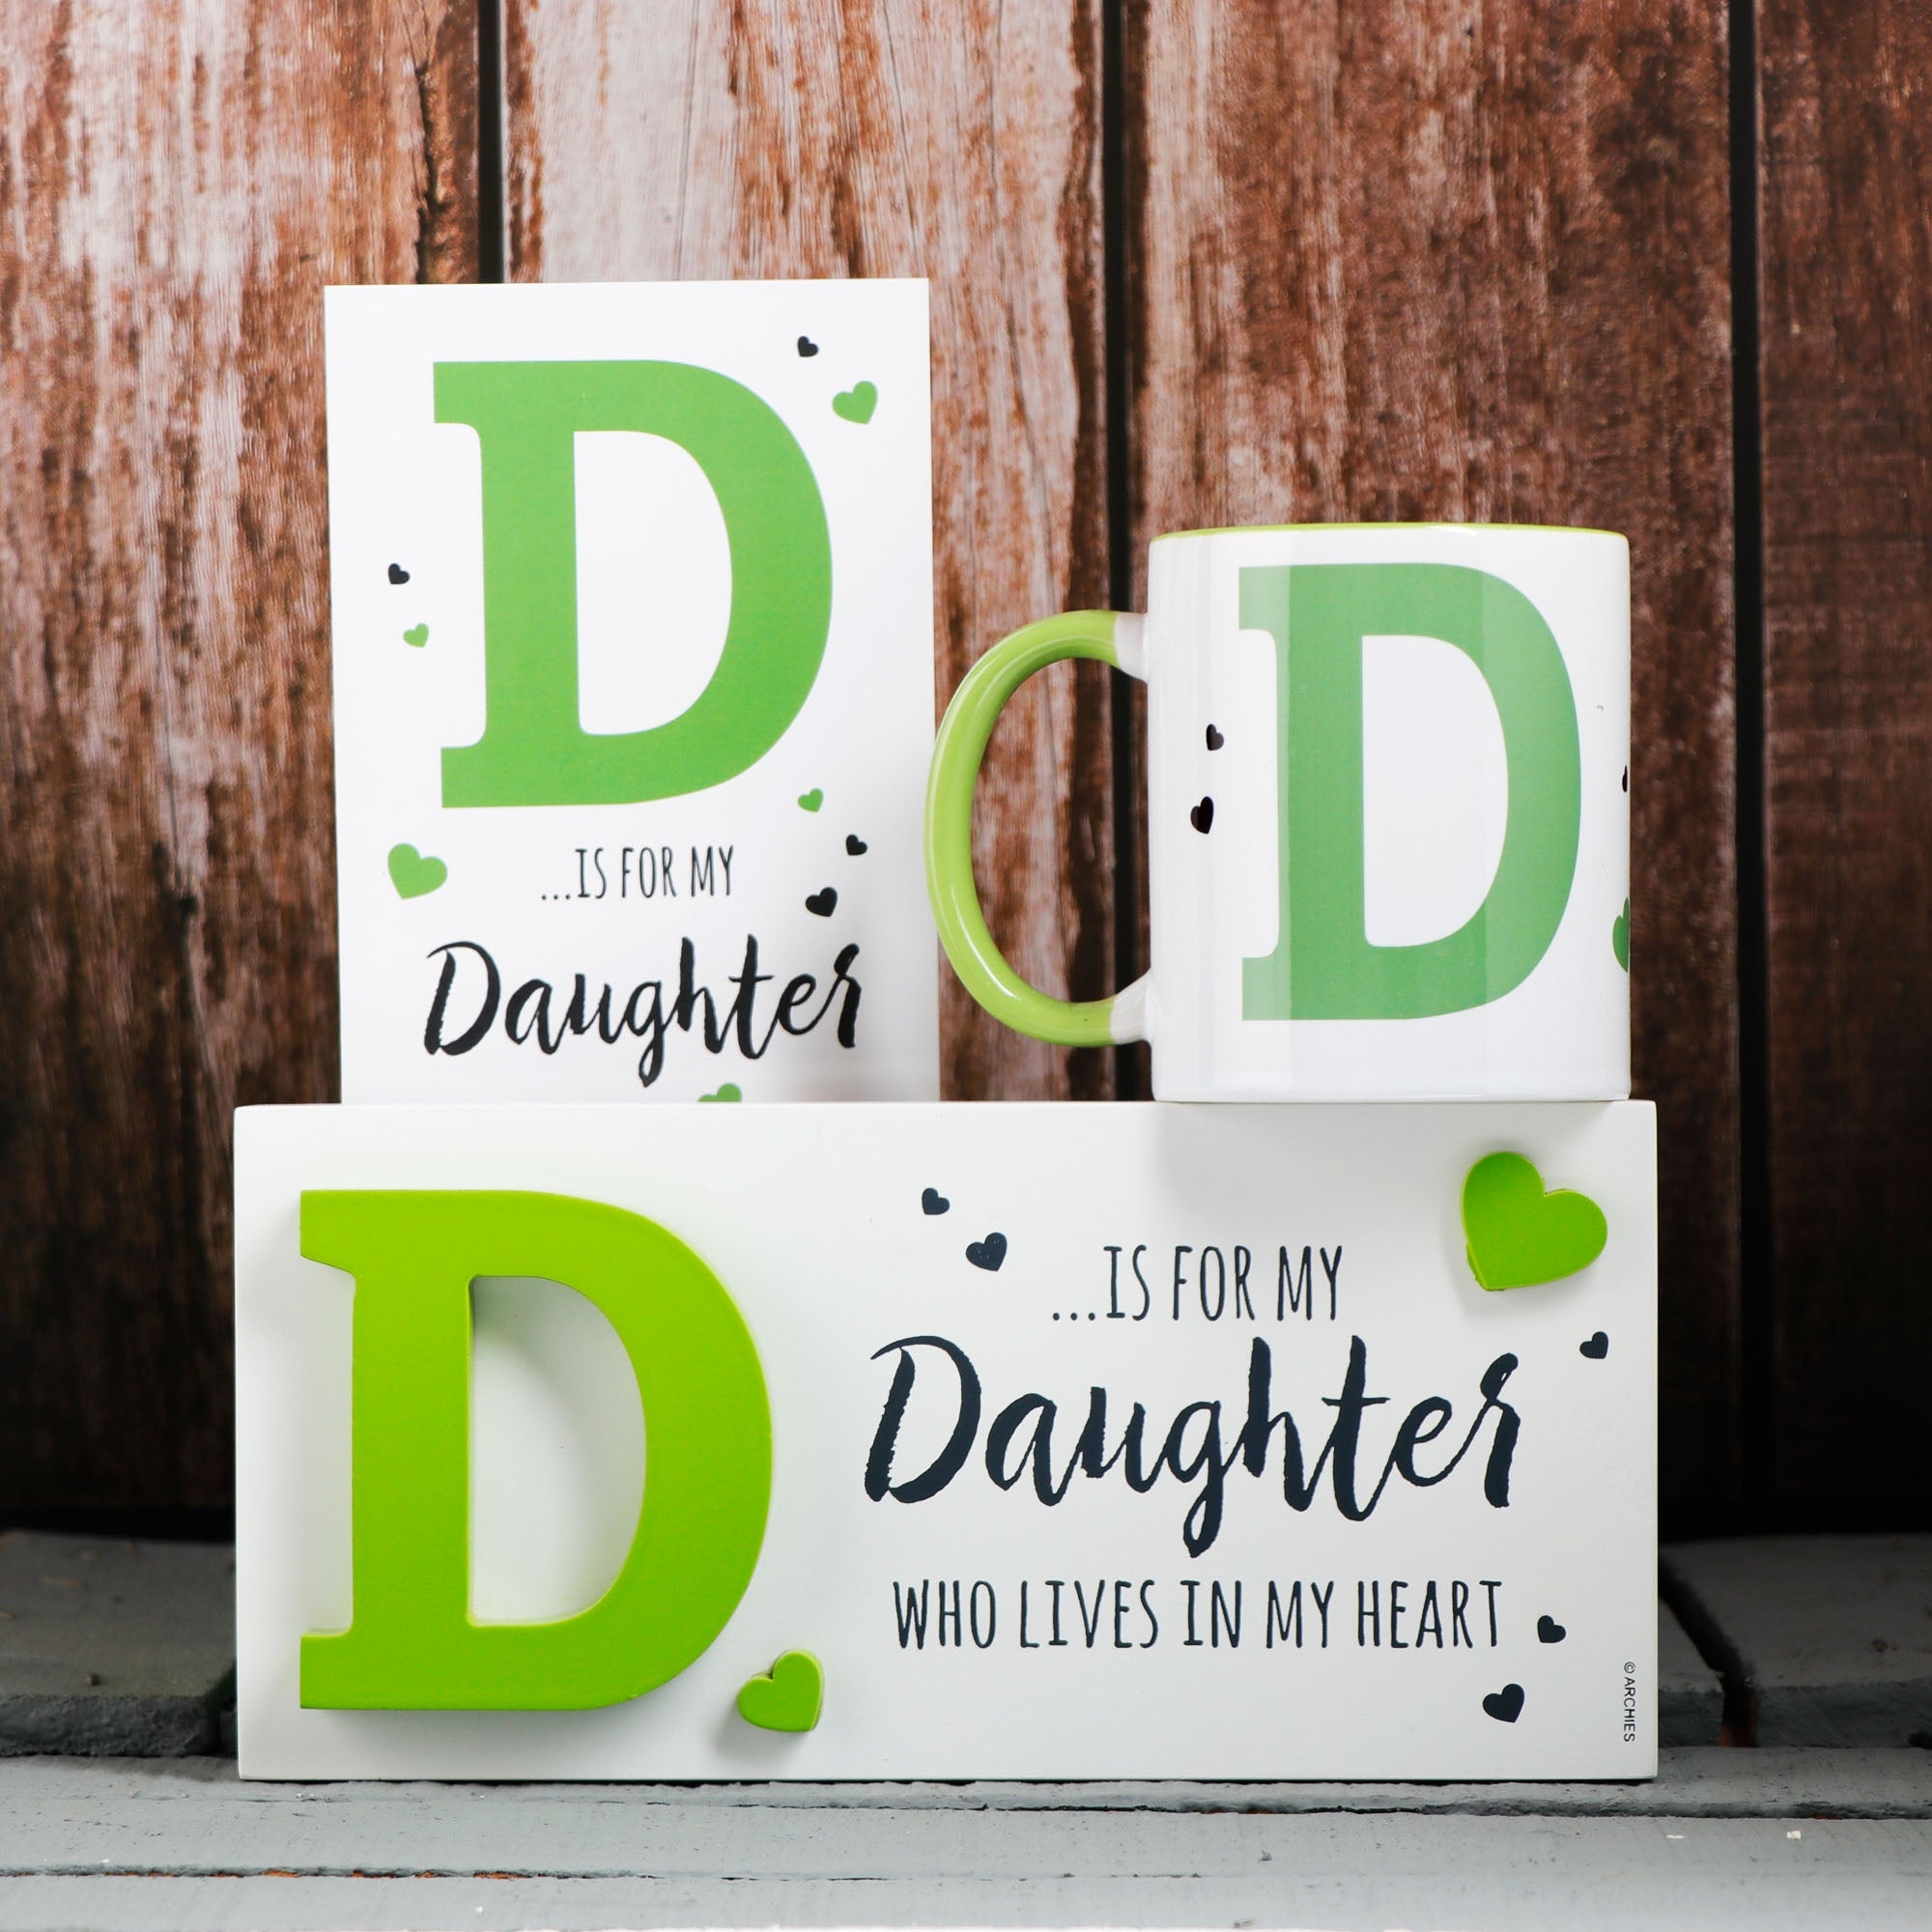 Archies KEEP SAKE Daughter Gift Combo with Ceramic Mug and Elevated Initial Quotation - with a FREE GREETING CARD